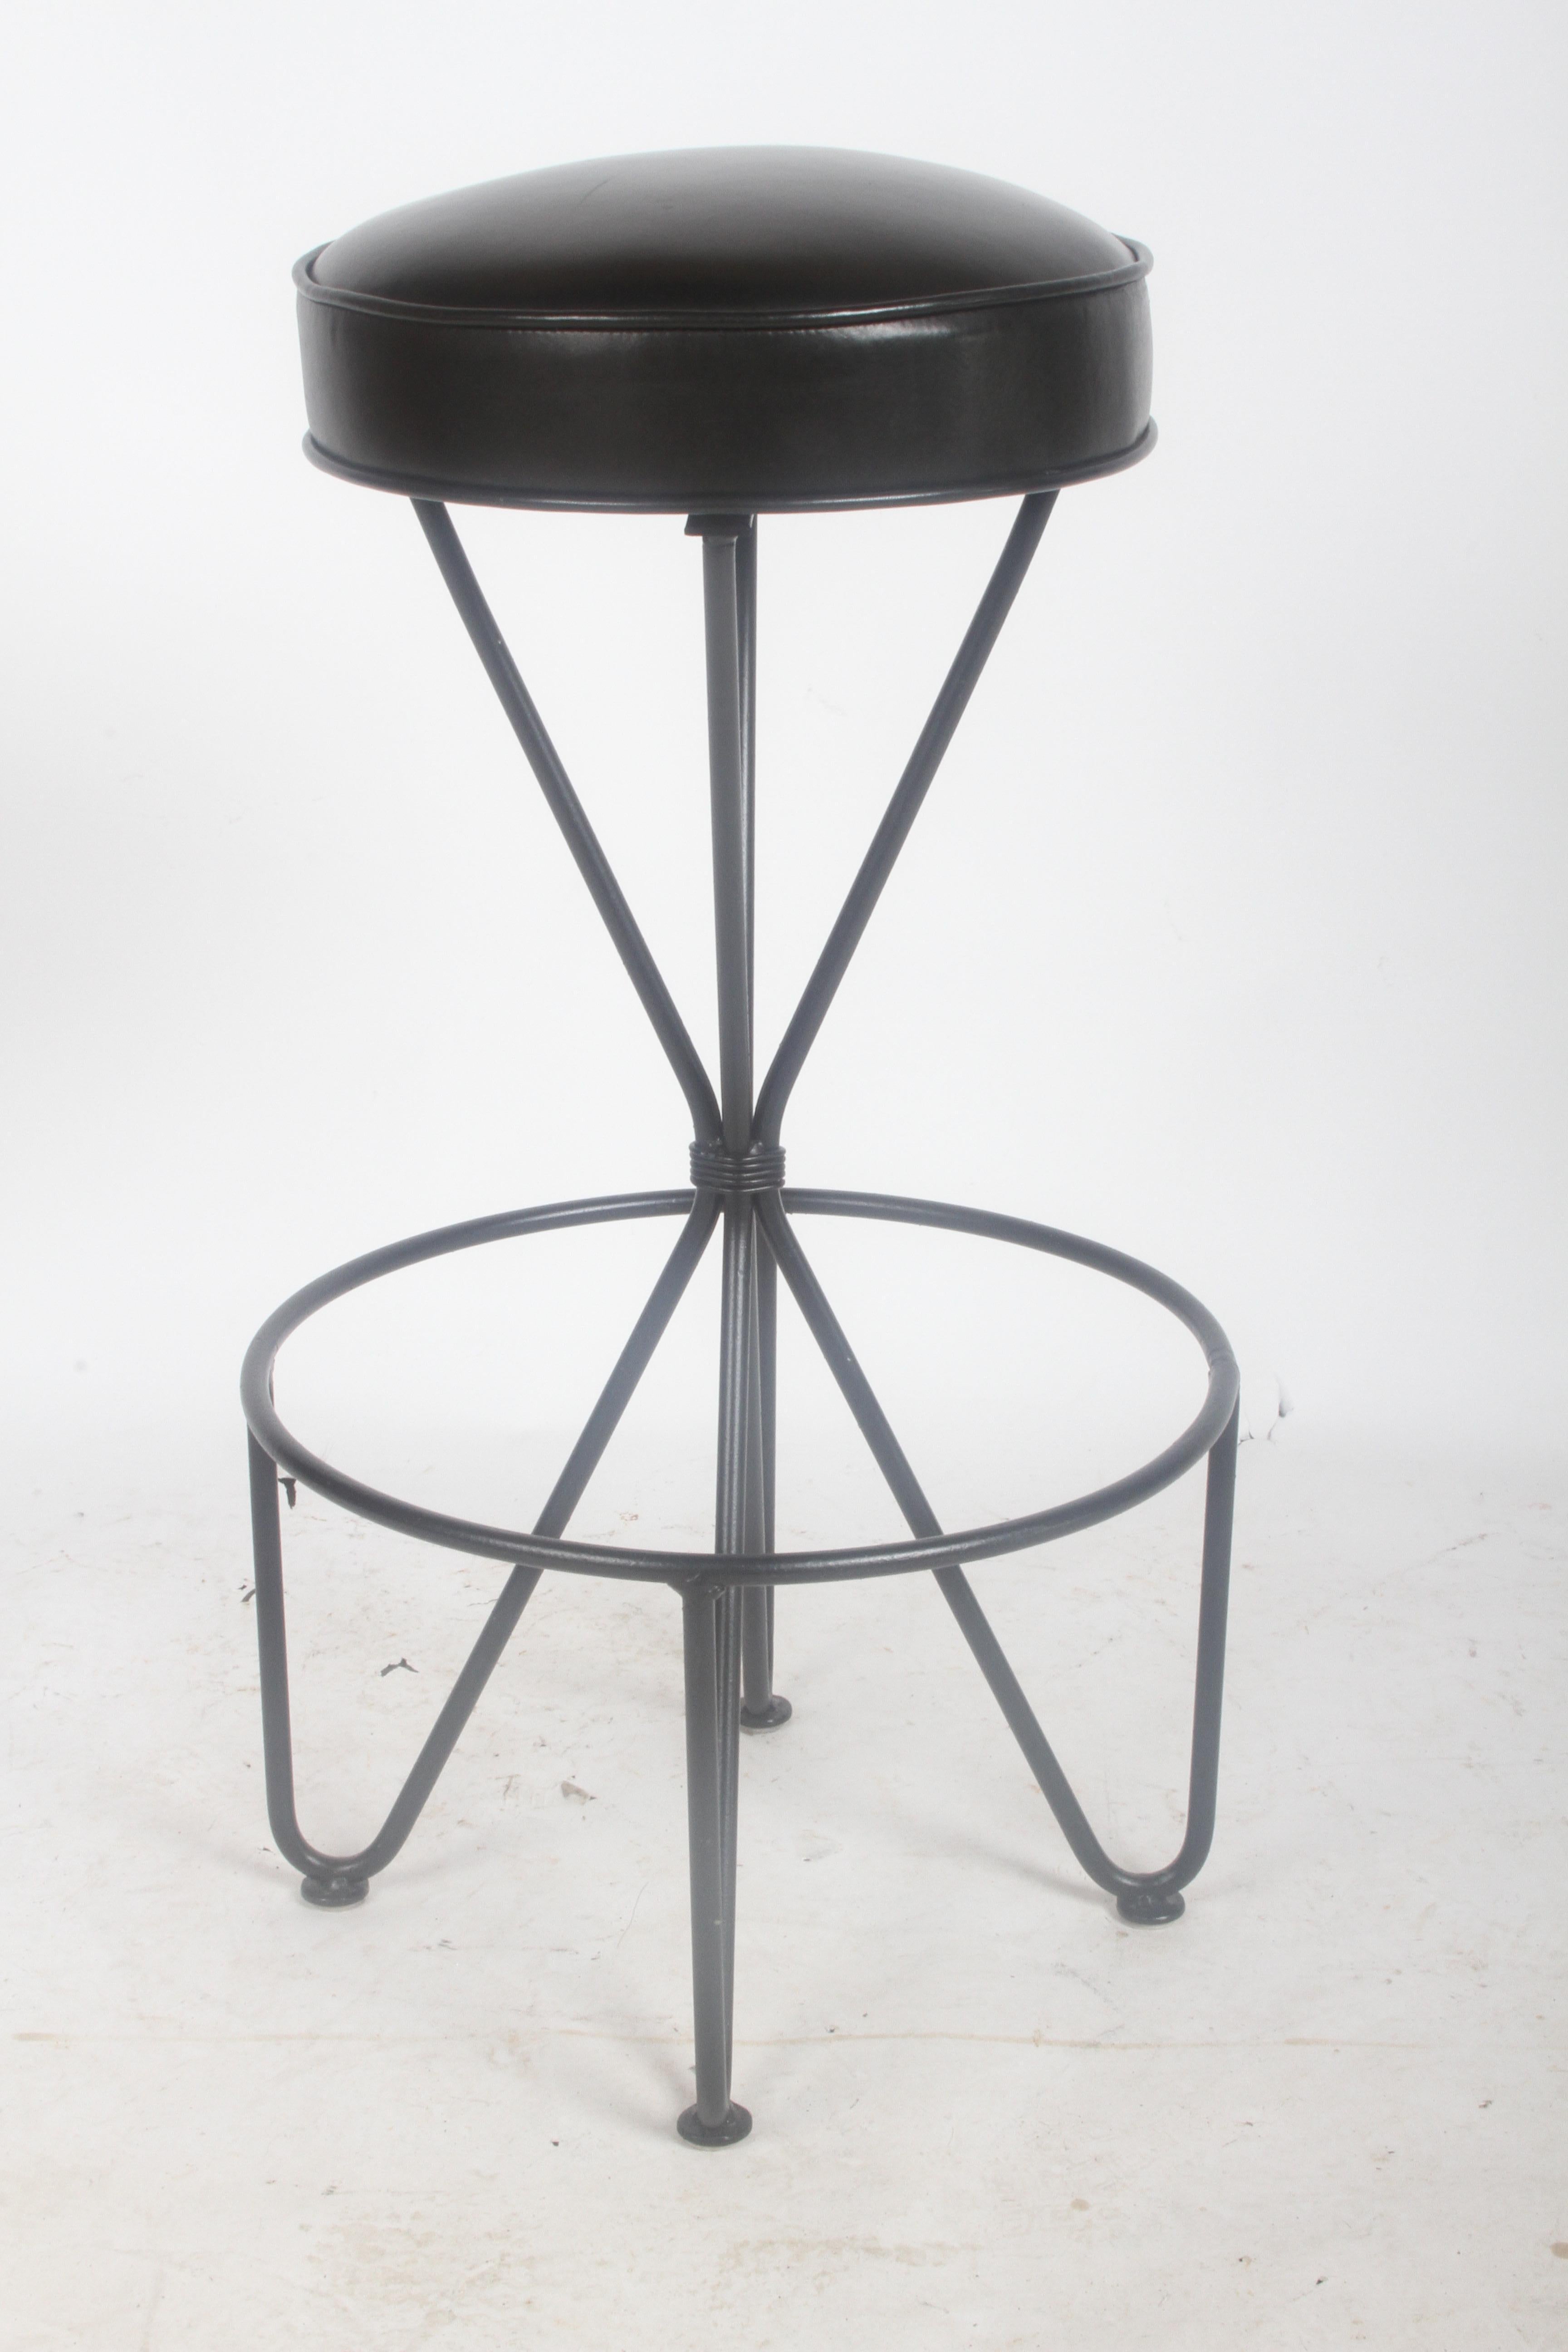 Single Frederick Weinberg circa 1950s swivel bar stool, refinished wrought iron base and black graphite leather seat. Light use, restored 4 years ago. Seat is 14